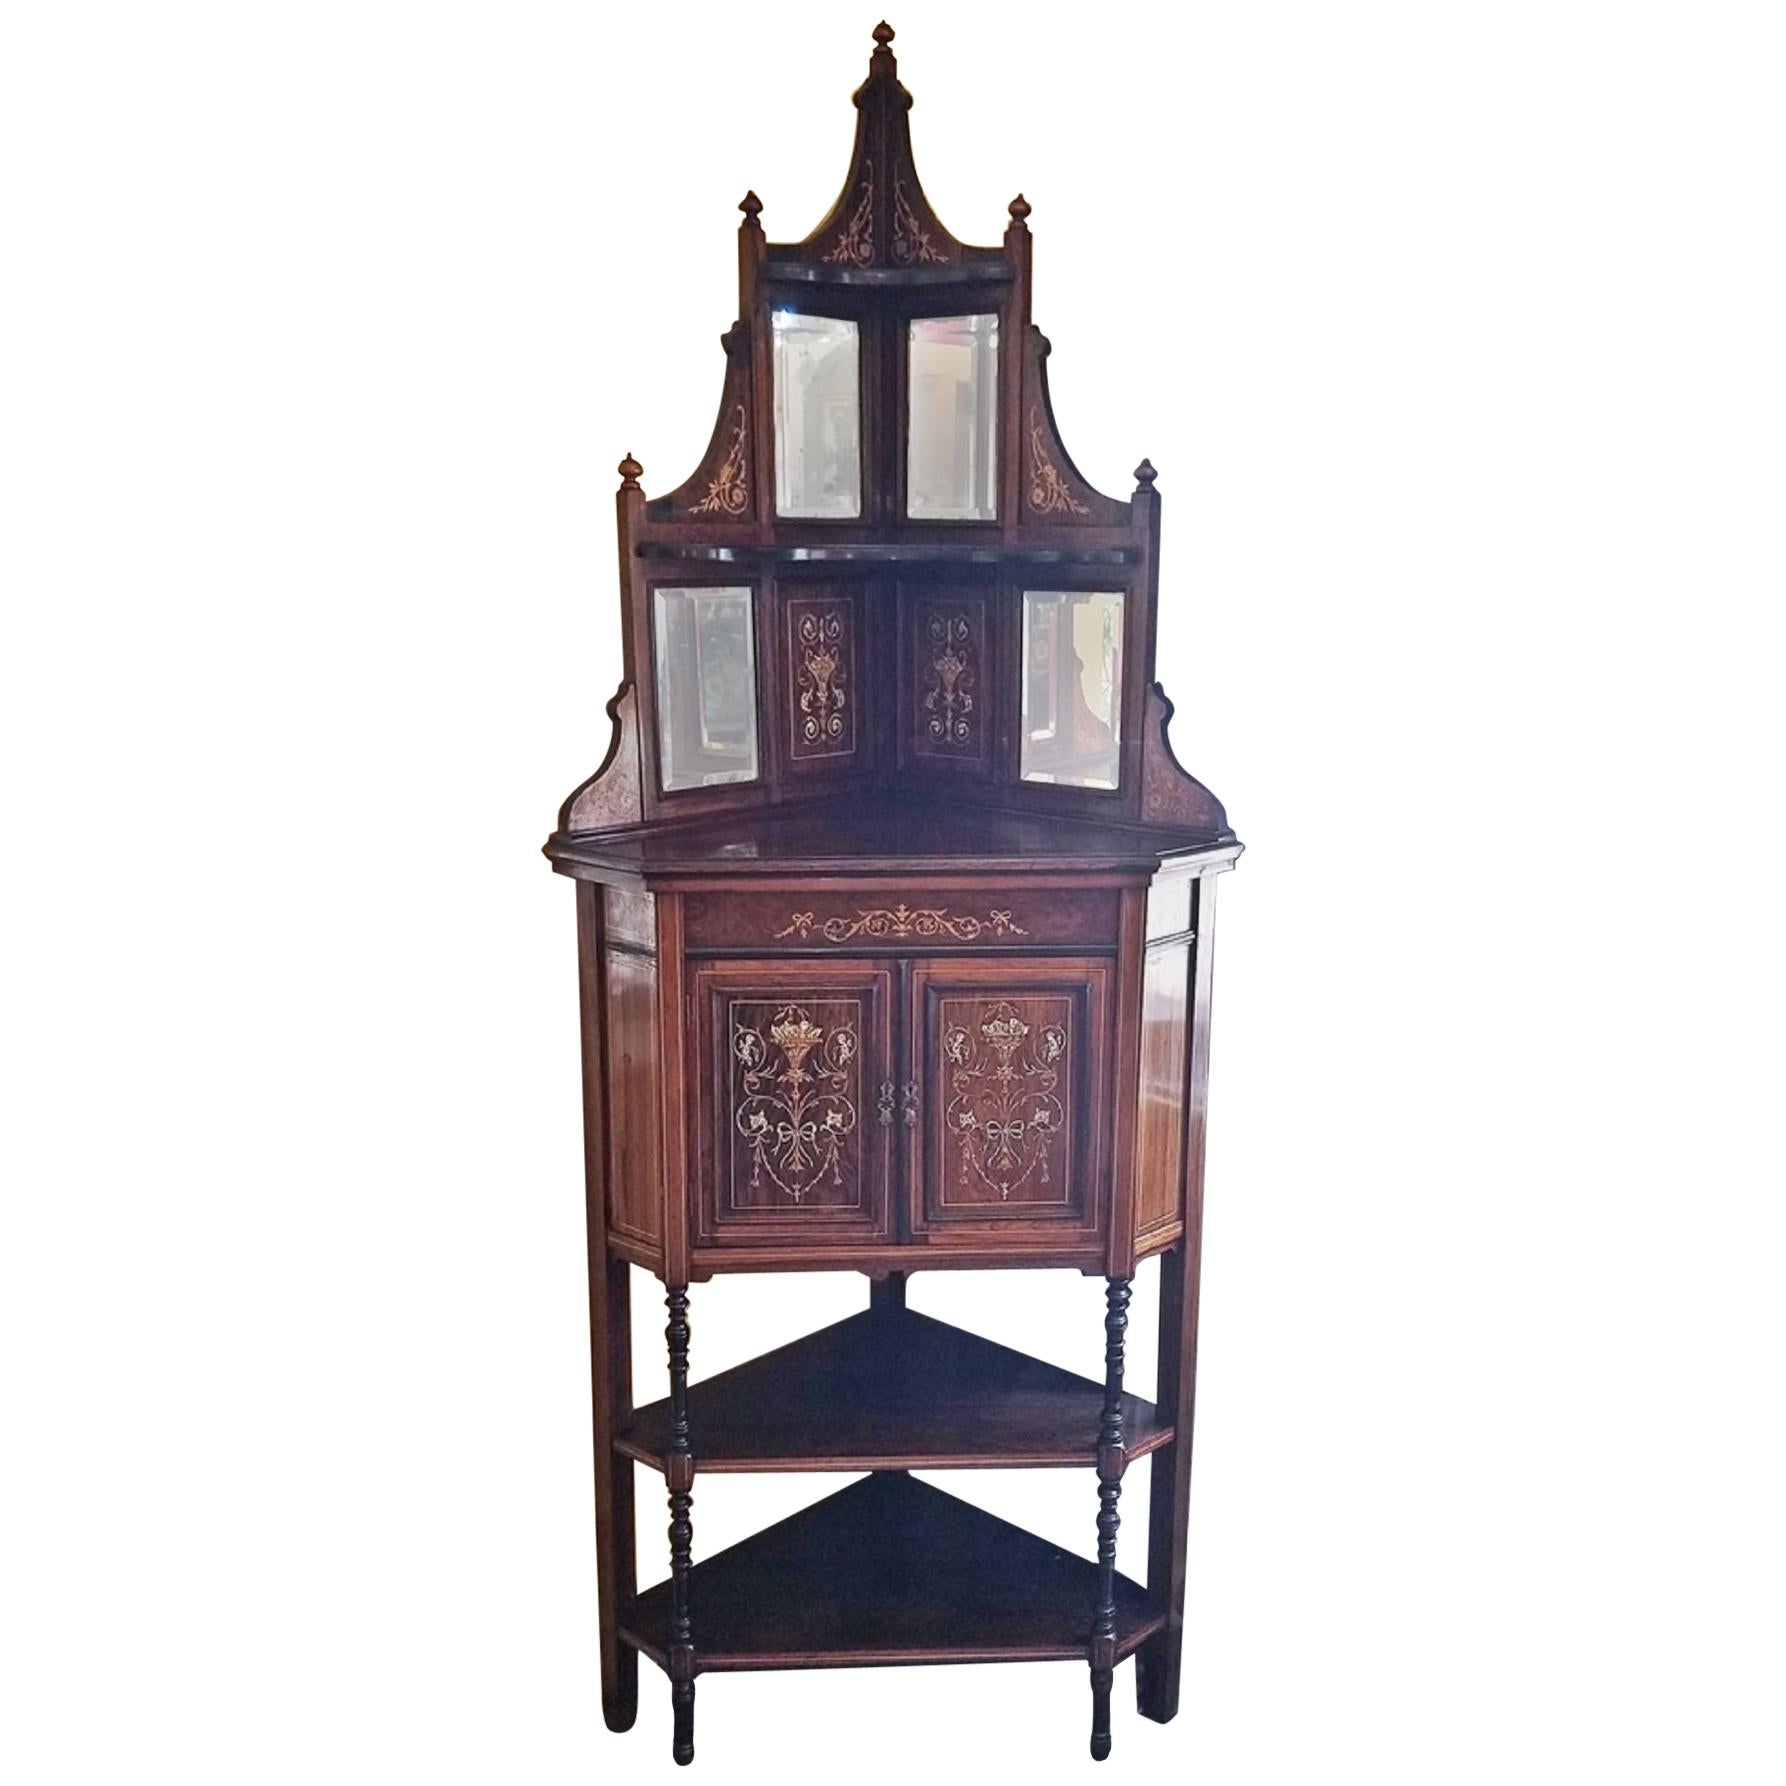 19C English Marquetry Inlaid Corner Cabinet Attributed to Collinson and Lock